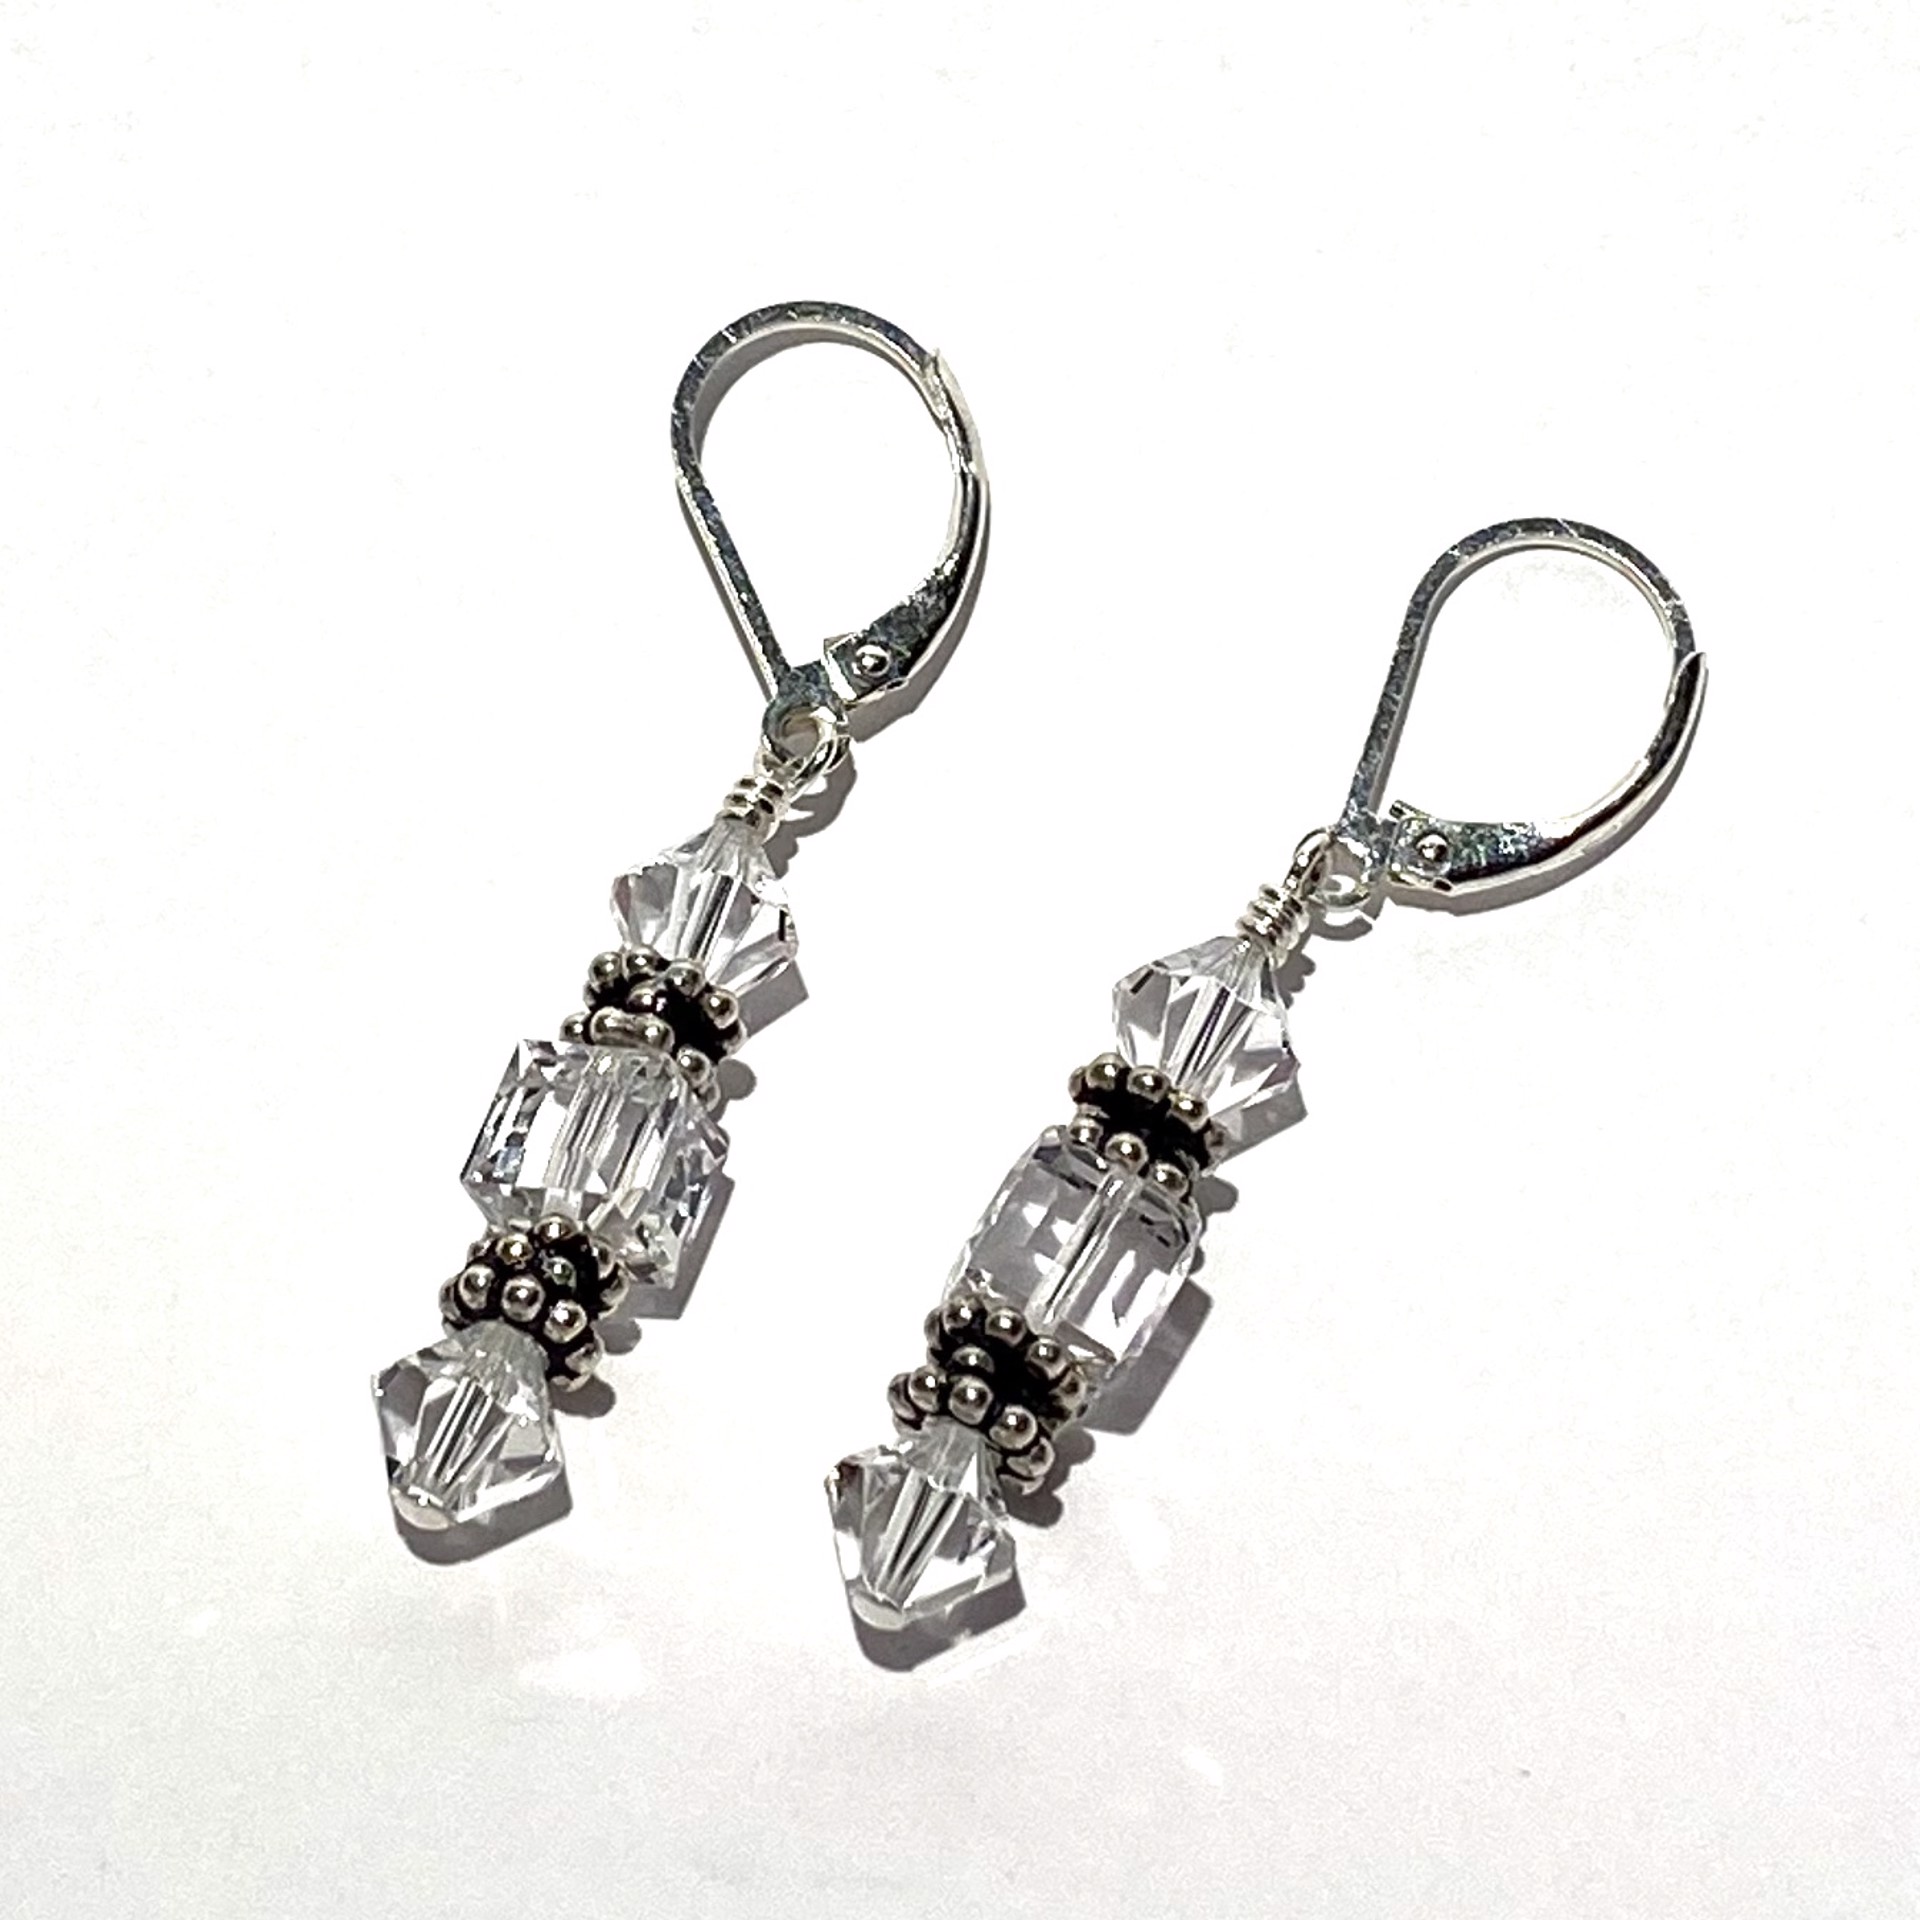 SHOSH20-65 Crystal and Silver Earrings by Shoshannah Weinisch